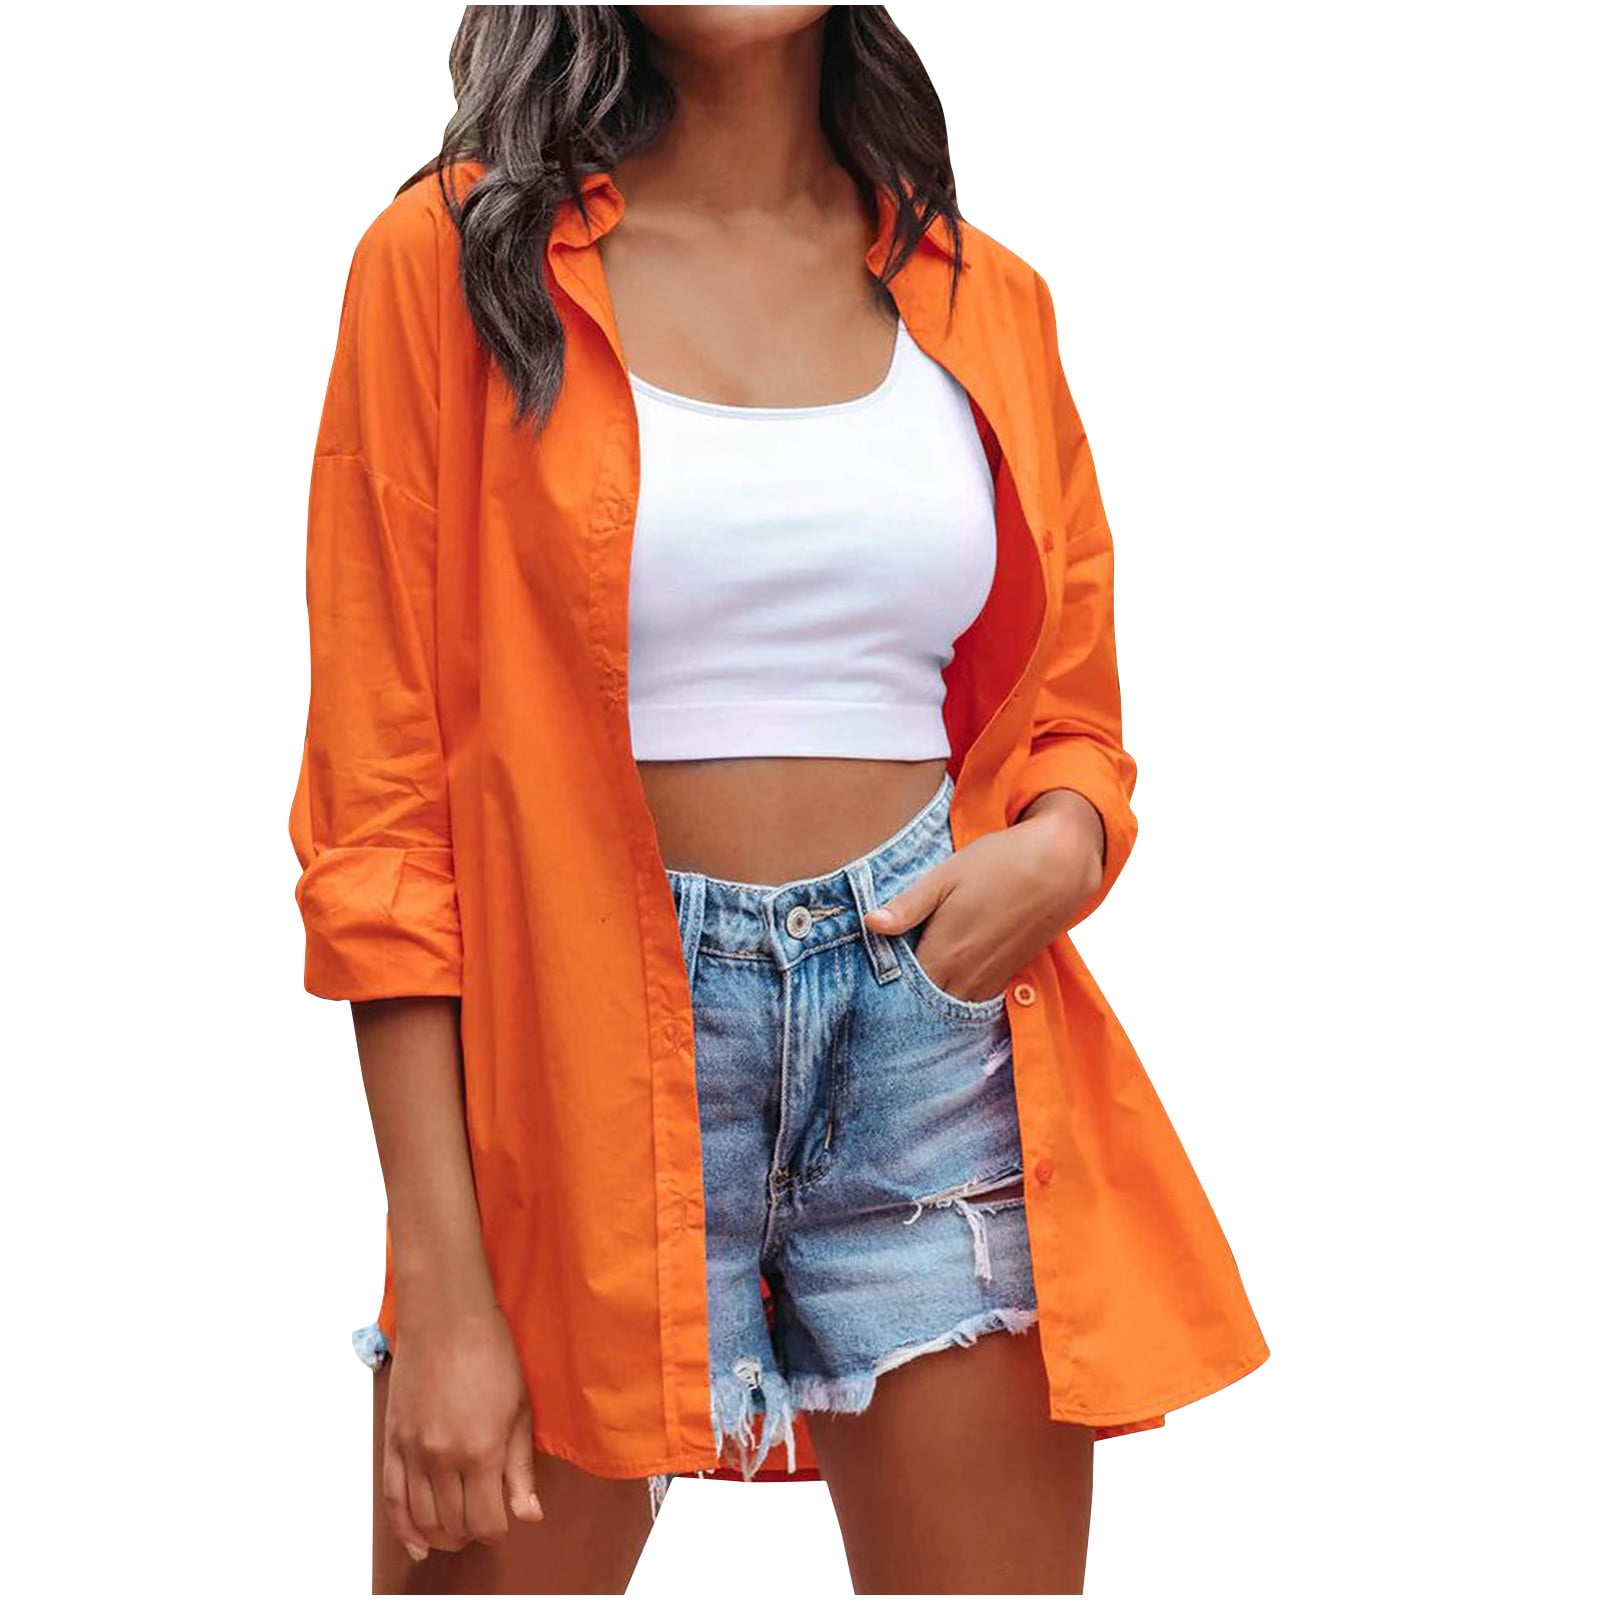 RYRJJ Oversized Button Down Shirts for Women Trendy Casual Long Sleeve  Candy Color V Neck Dressy Work Blouses Tops(Orange,XL) 